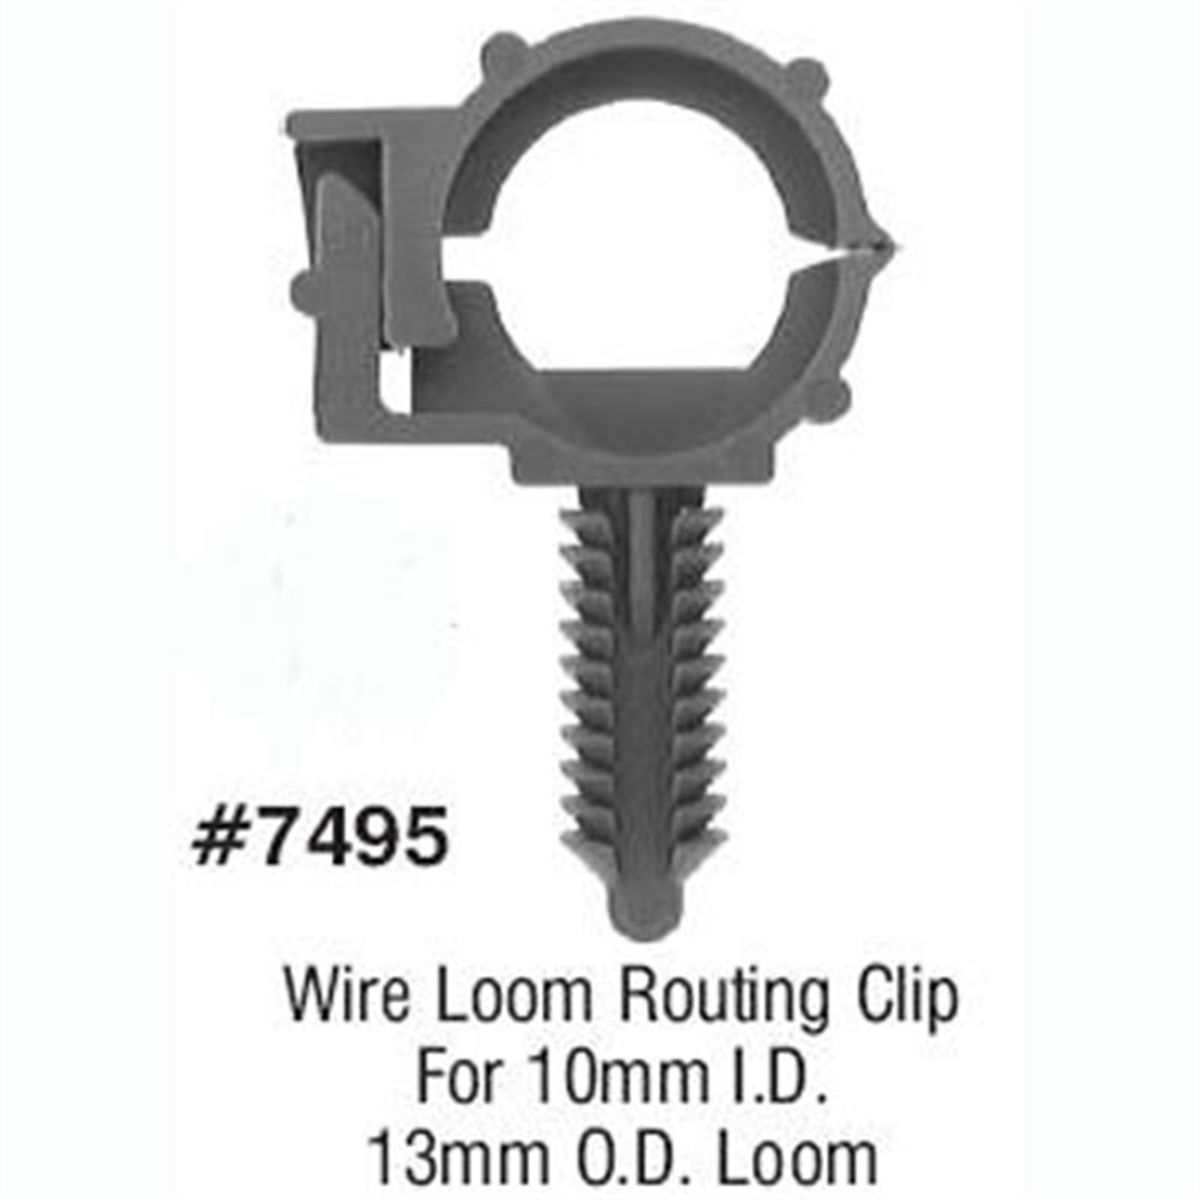 GM wire loom routing clip